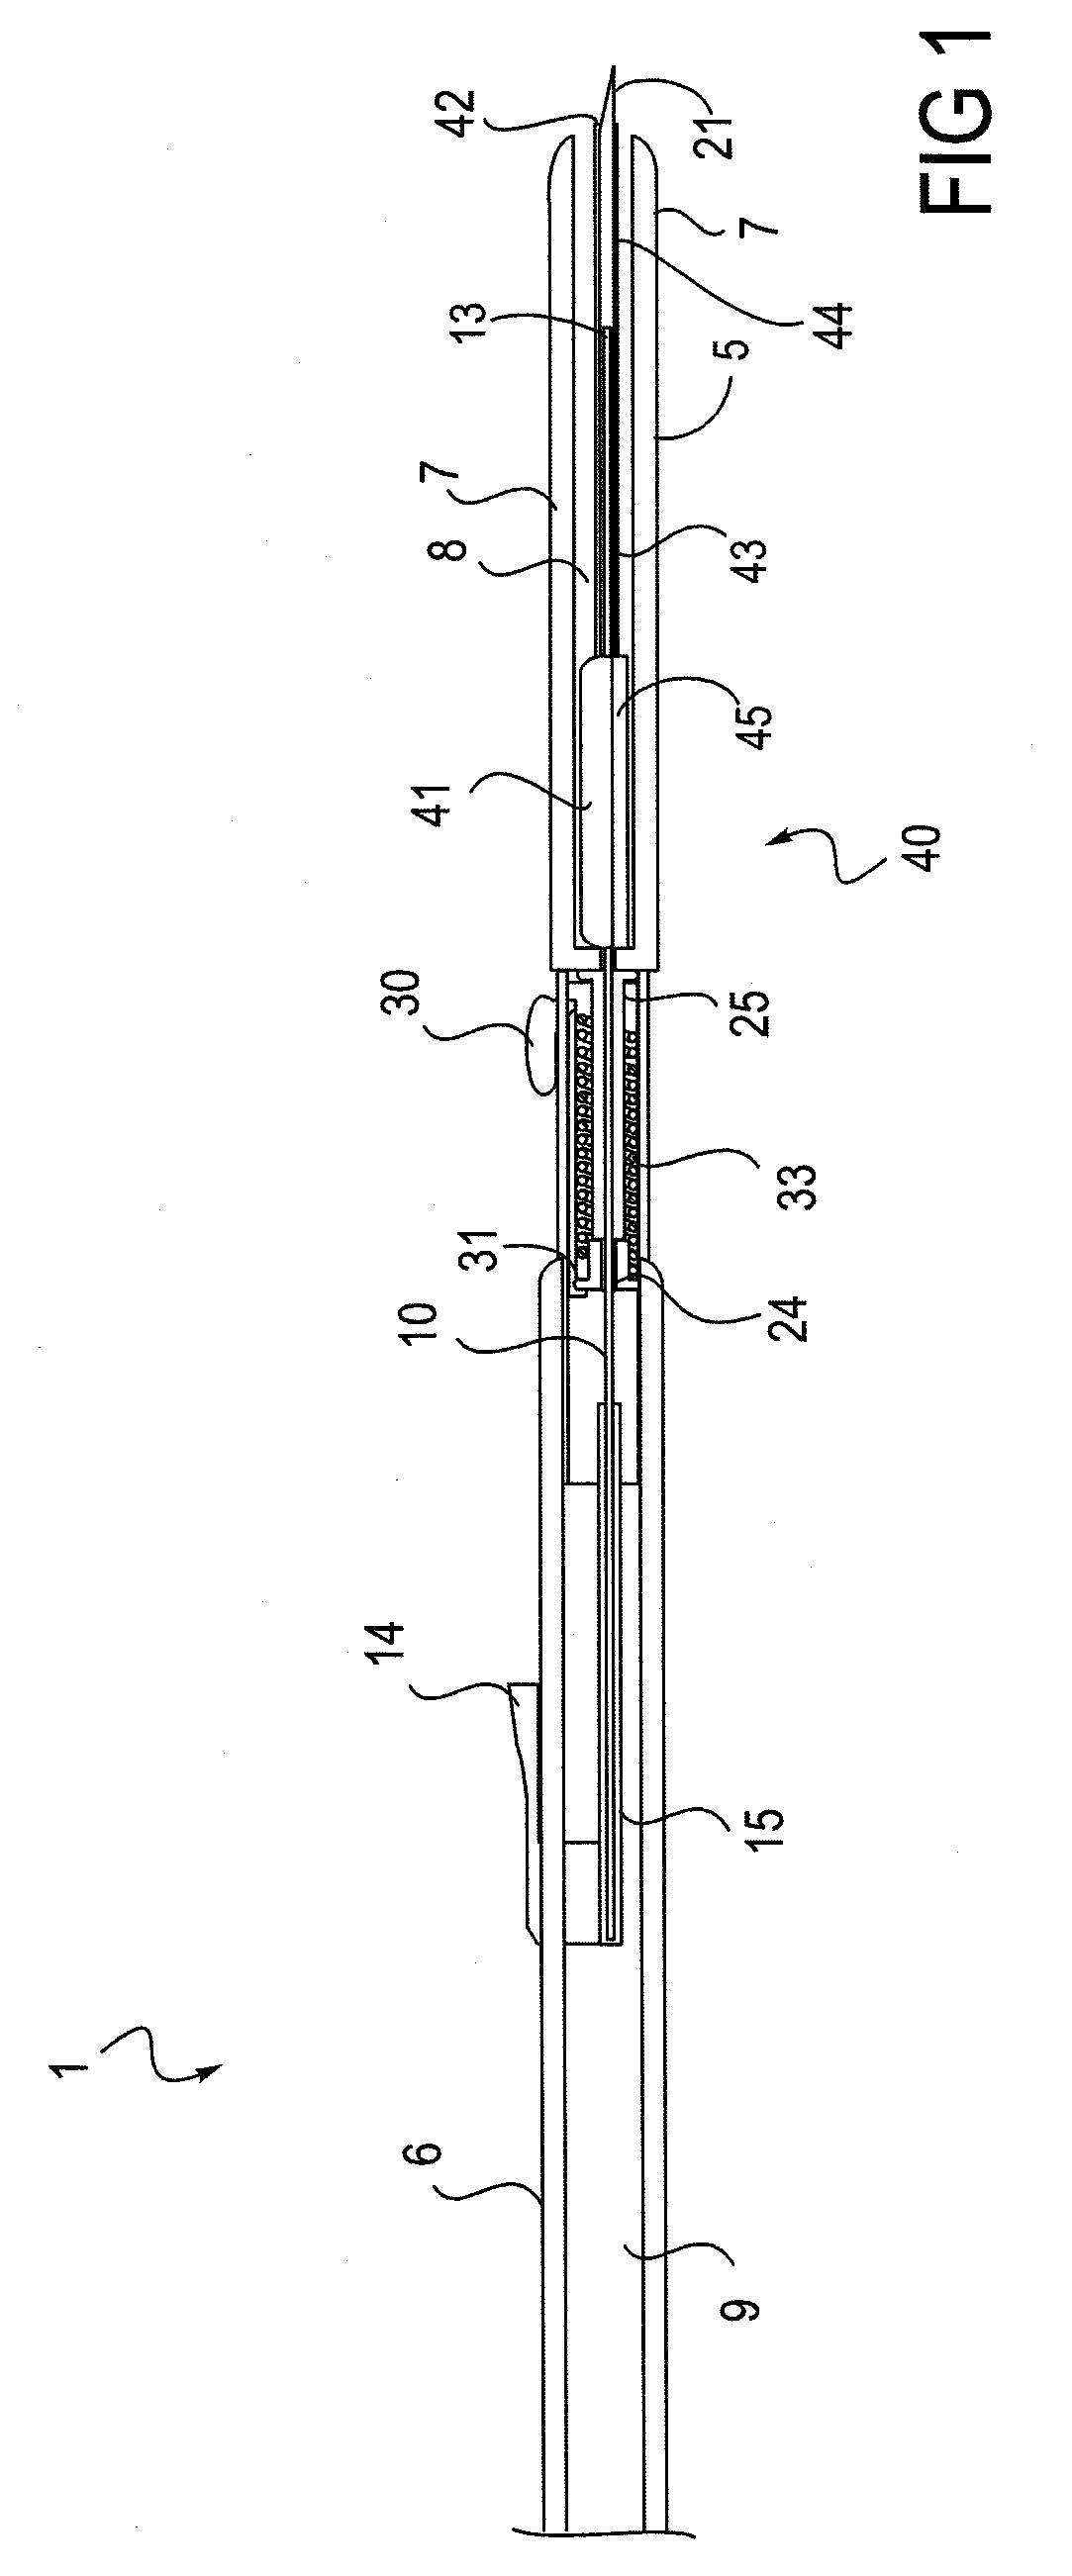 Intravenous catheter insertion and blood sample devices and method of use